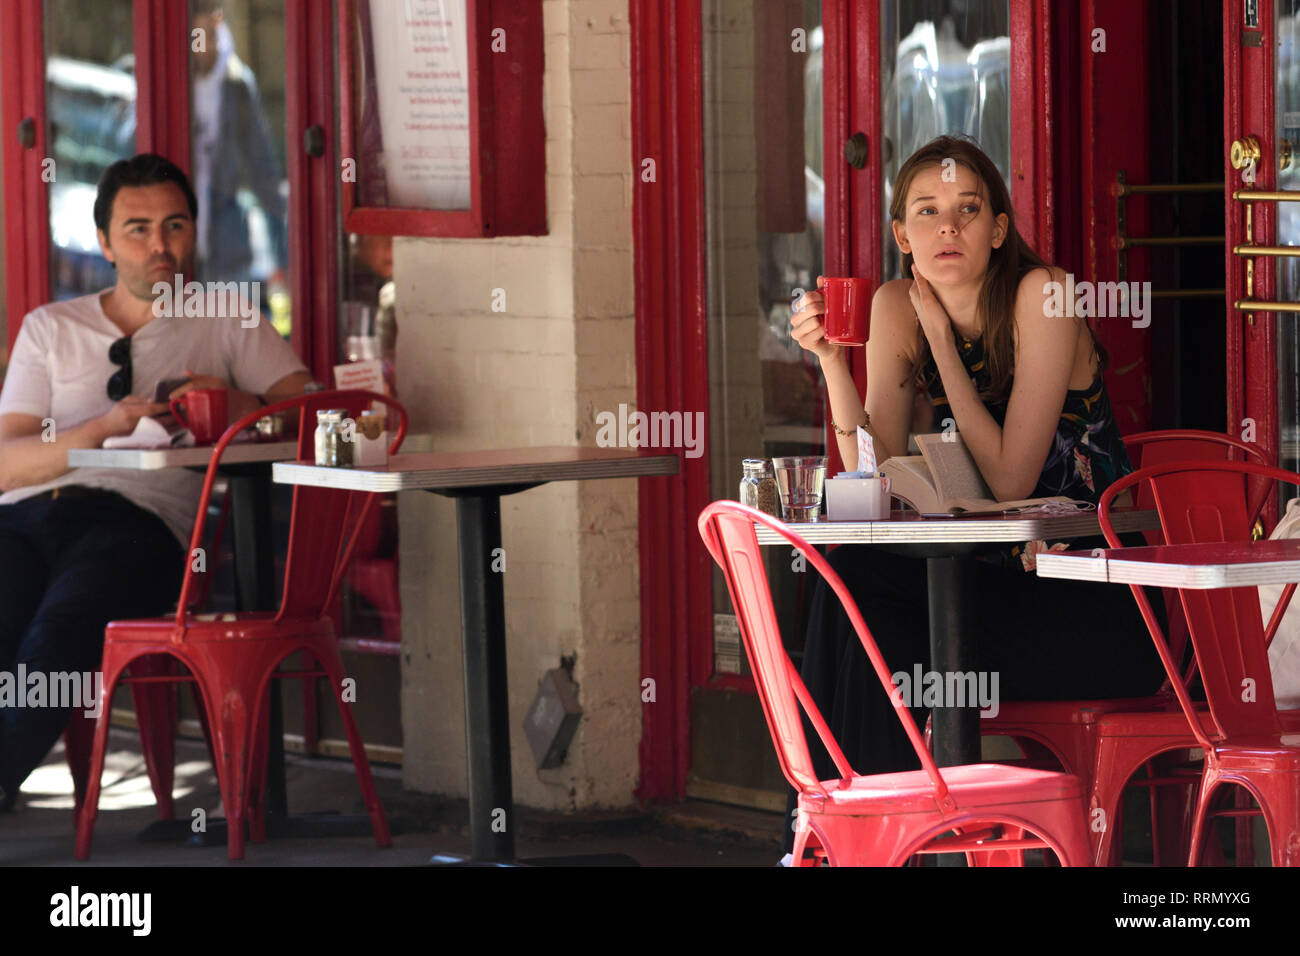 USA, American, New York, Manhattan, Greenwich Village, café, woman in cafe Banque D'Images